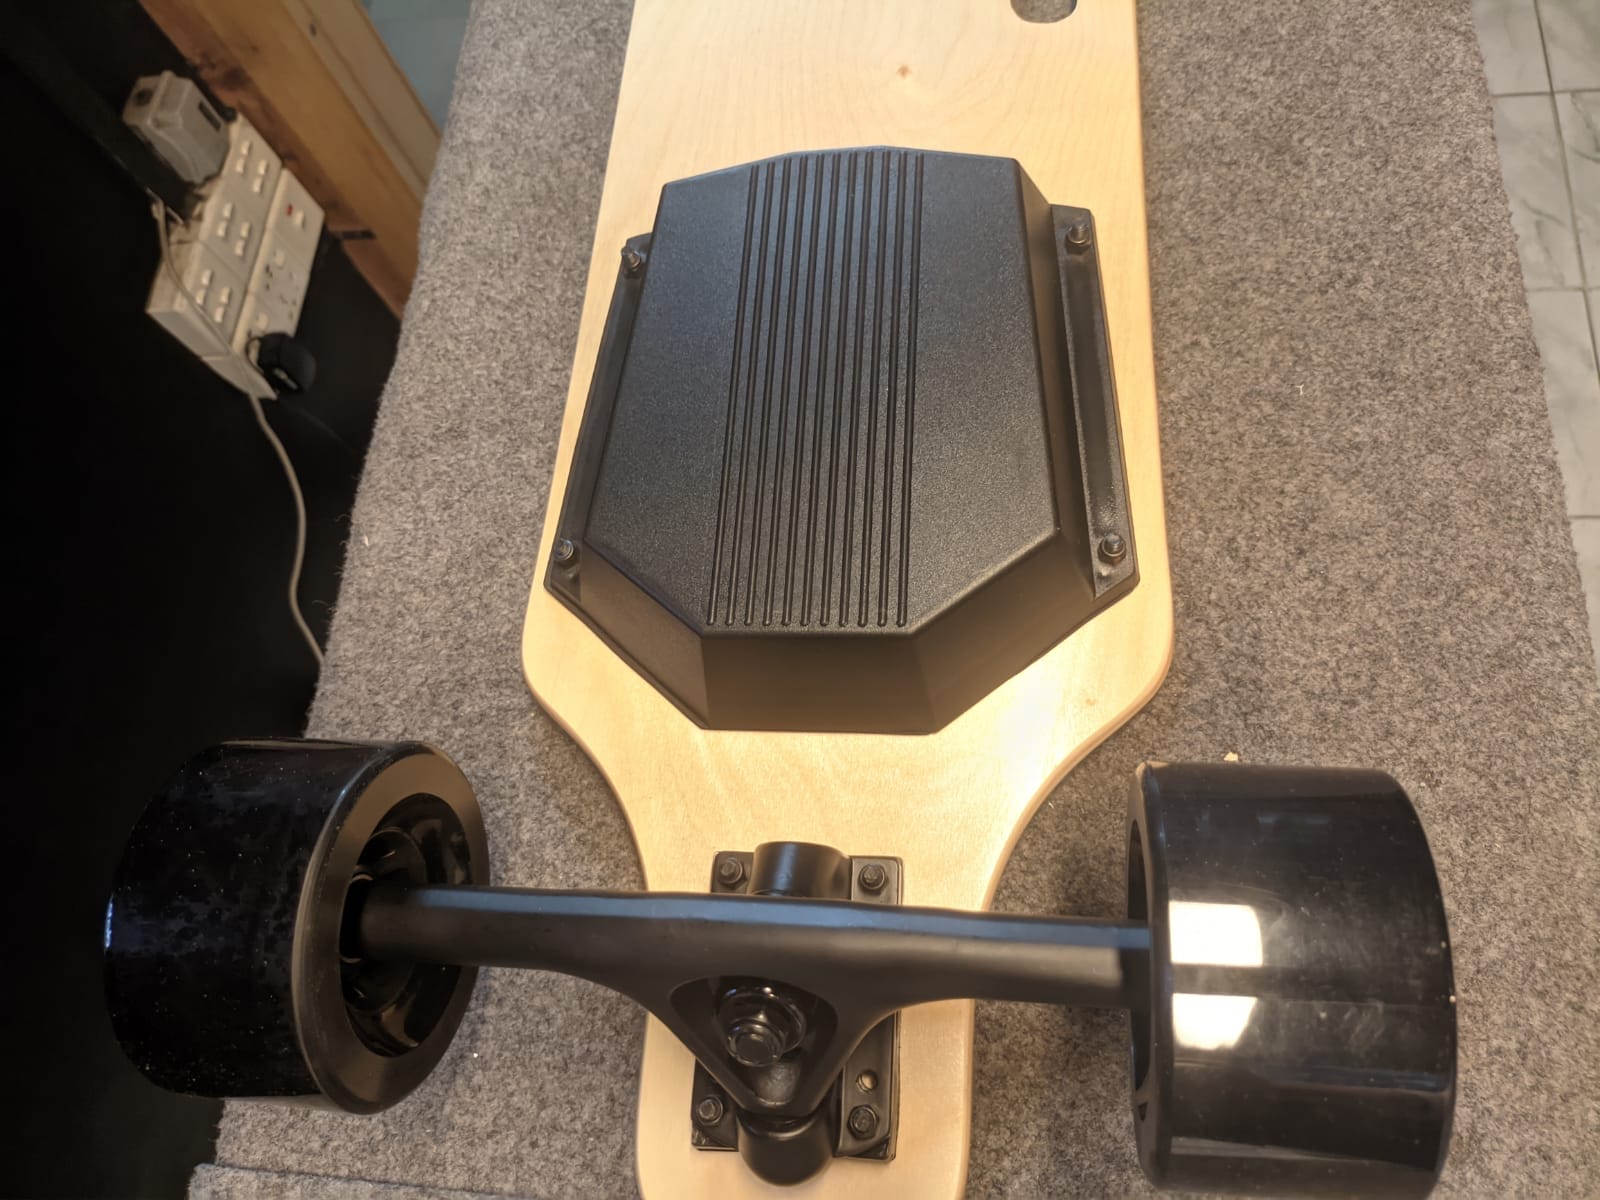 Water Resistance

This is a must-consider factor for an electric skateboard.